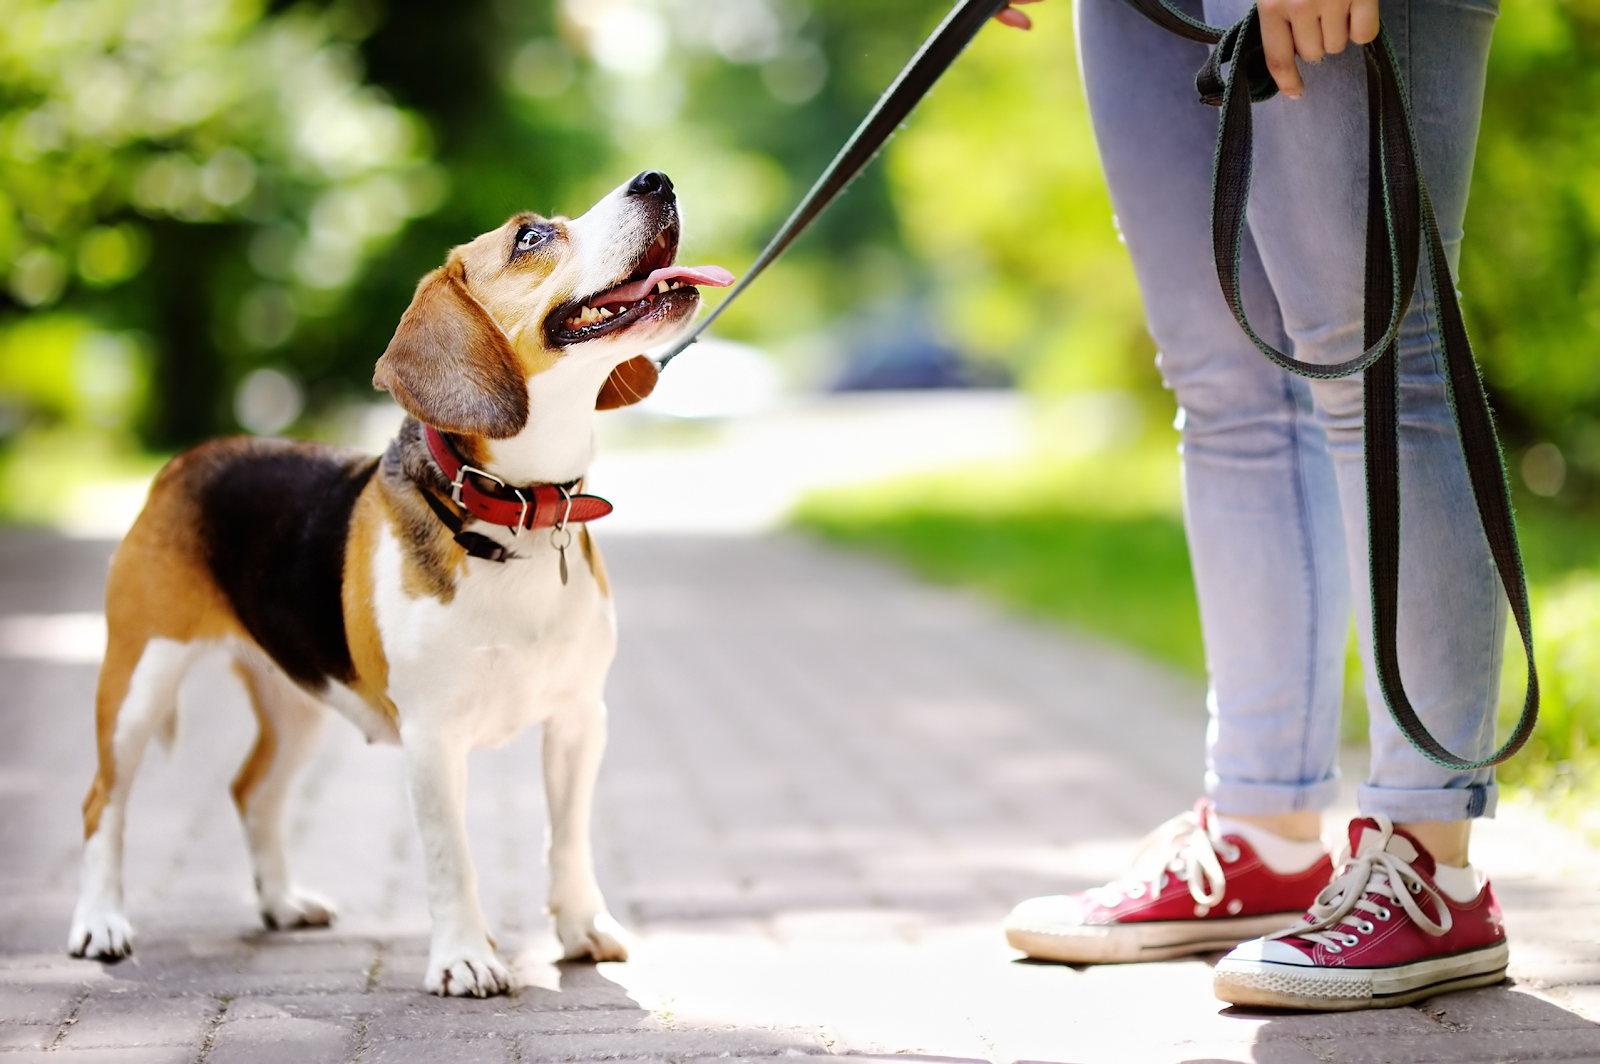 HOW TO CHOOSE THE RIGHT LEAD FOR YOUR DOG